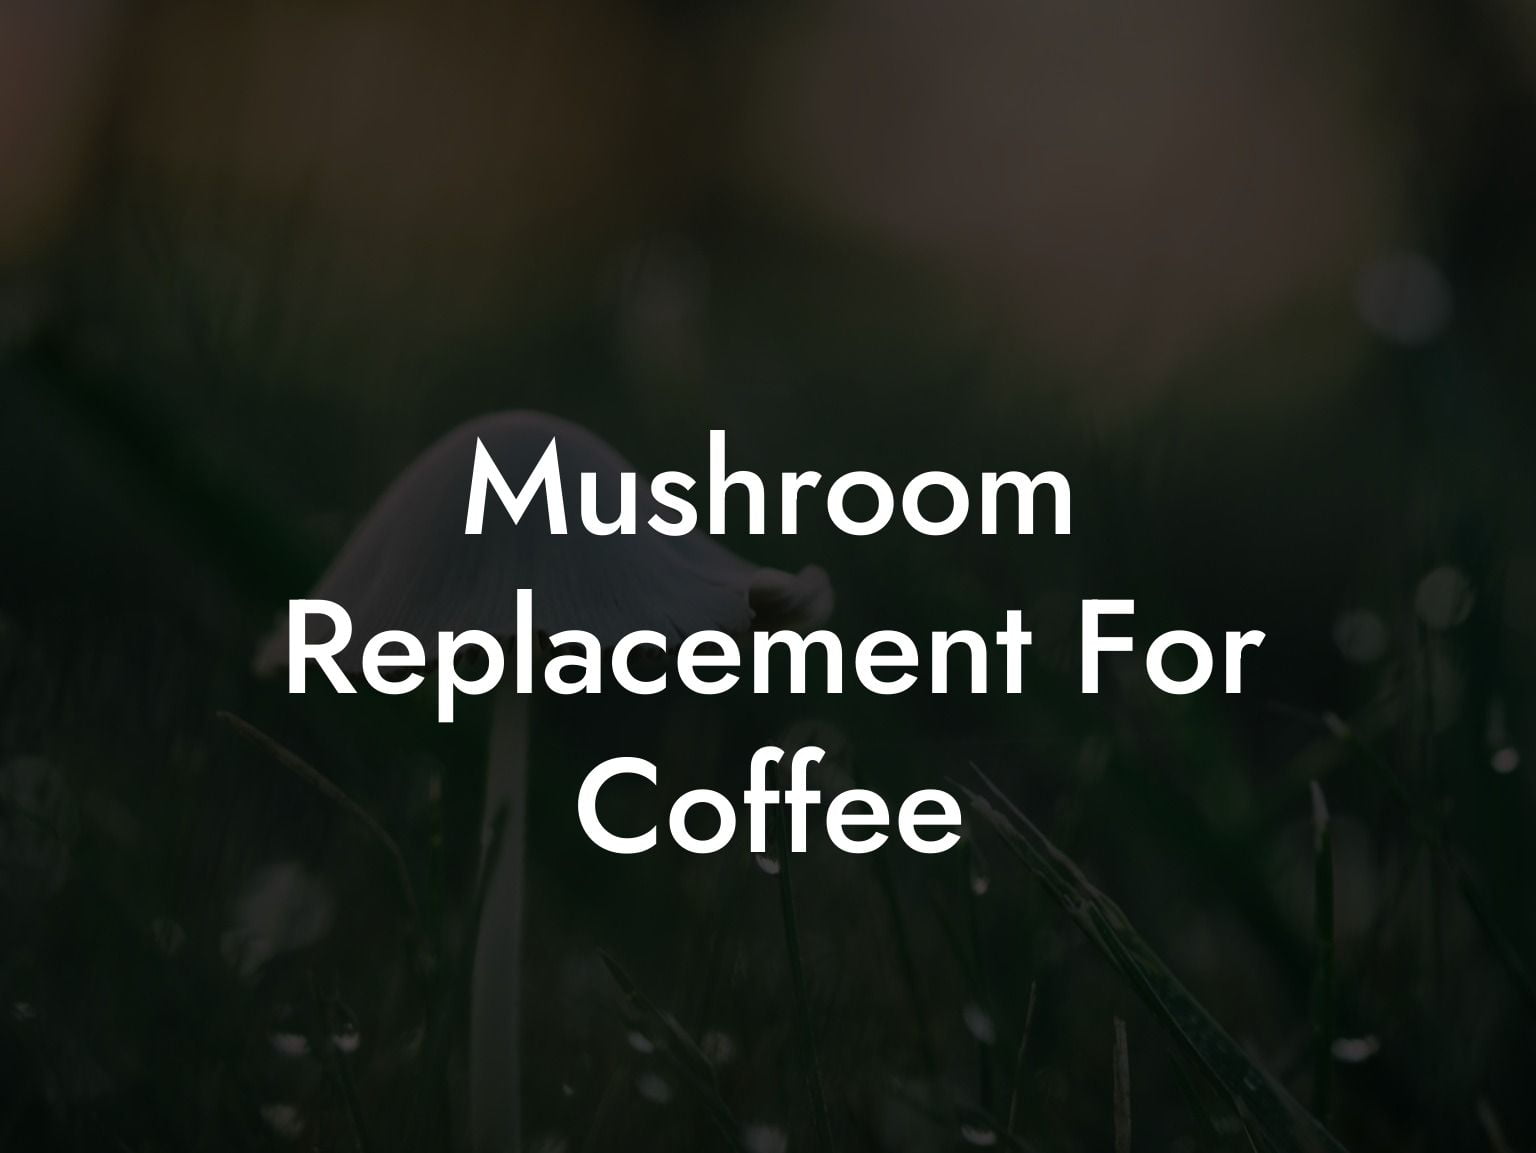 Mushroom Replacement For Coffee